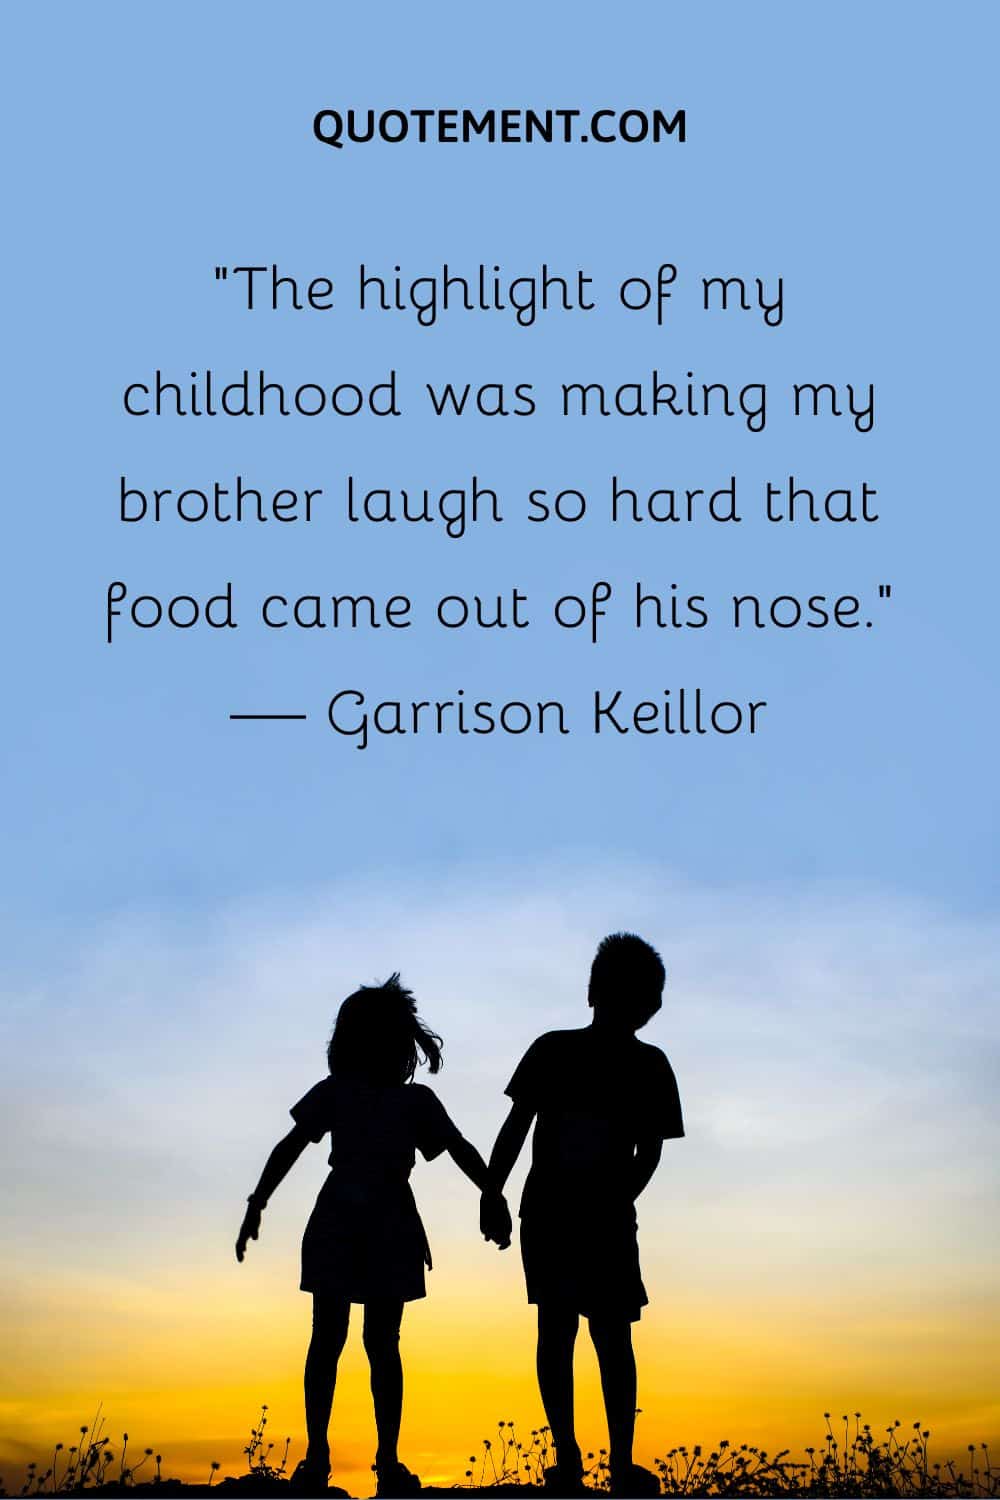 “The highlight of my childhood was making my brother laugh so hard that food came out of his nose.” — Garrison Keillor